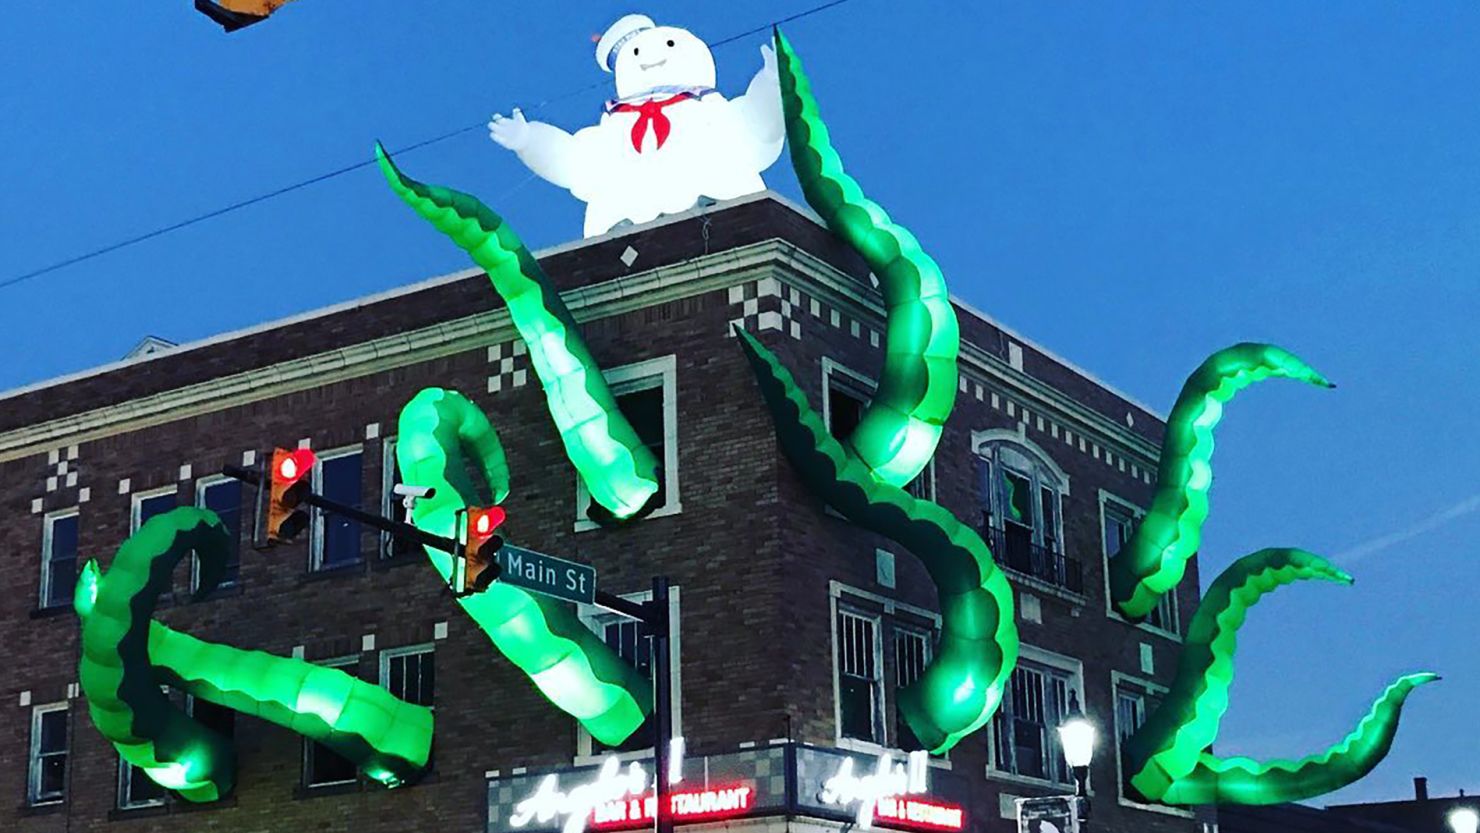 An Italian restaurant in Pennsylvania is responsible for this spooky and spectacular Halloween decoration.